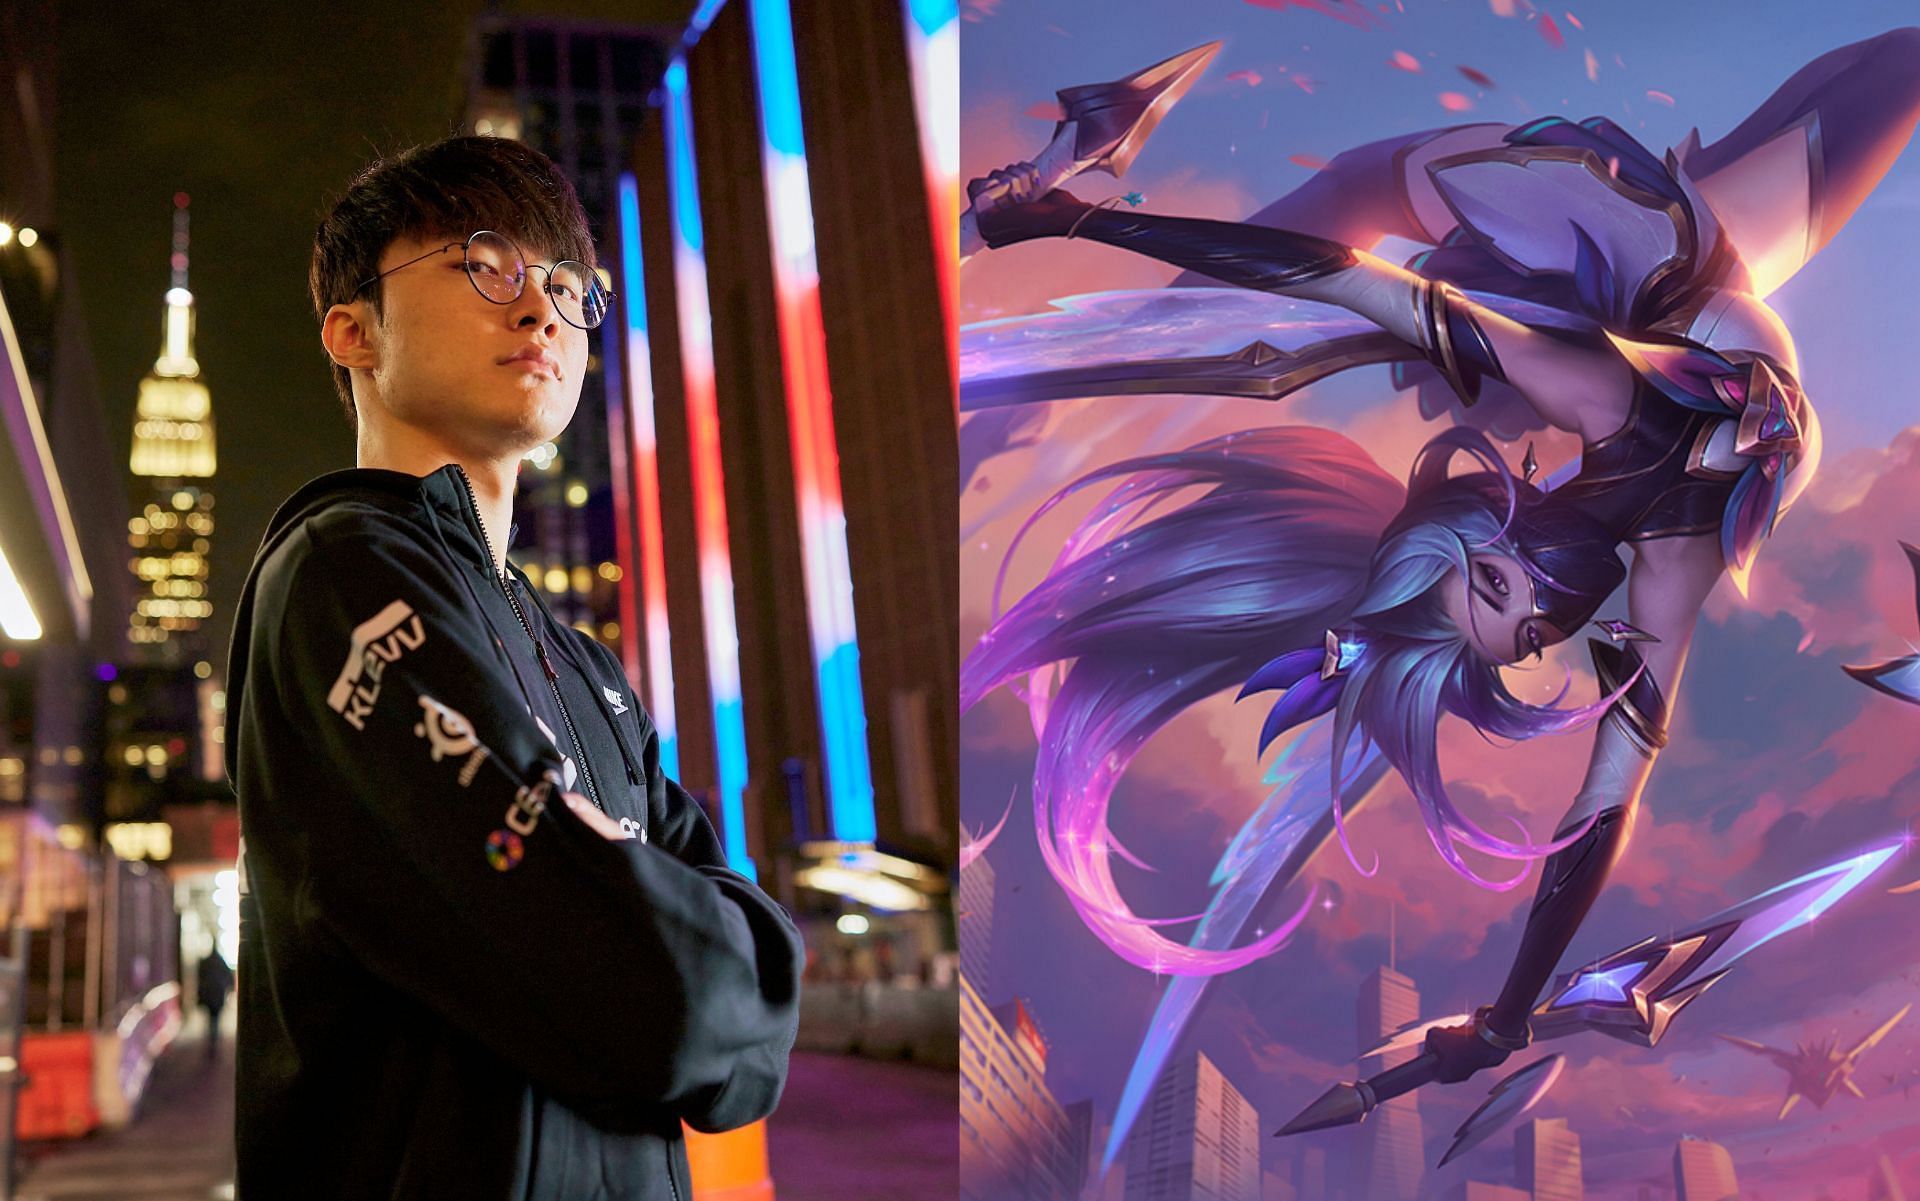 Faker might choose an Akali skin if he wins his fourth World Championship title (Image via Riot Games)